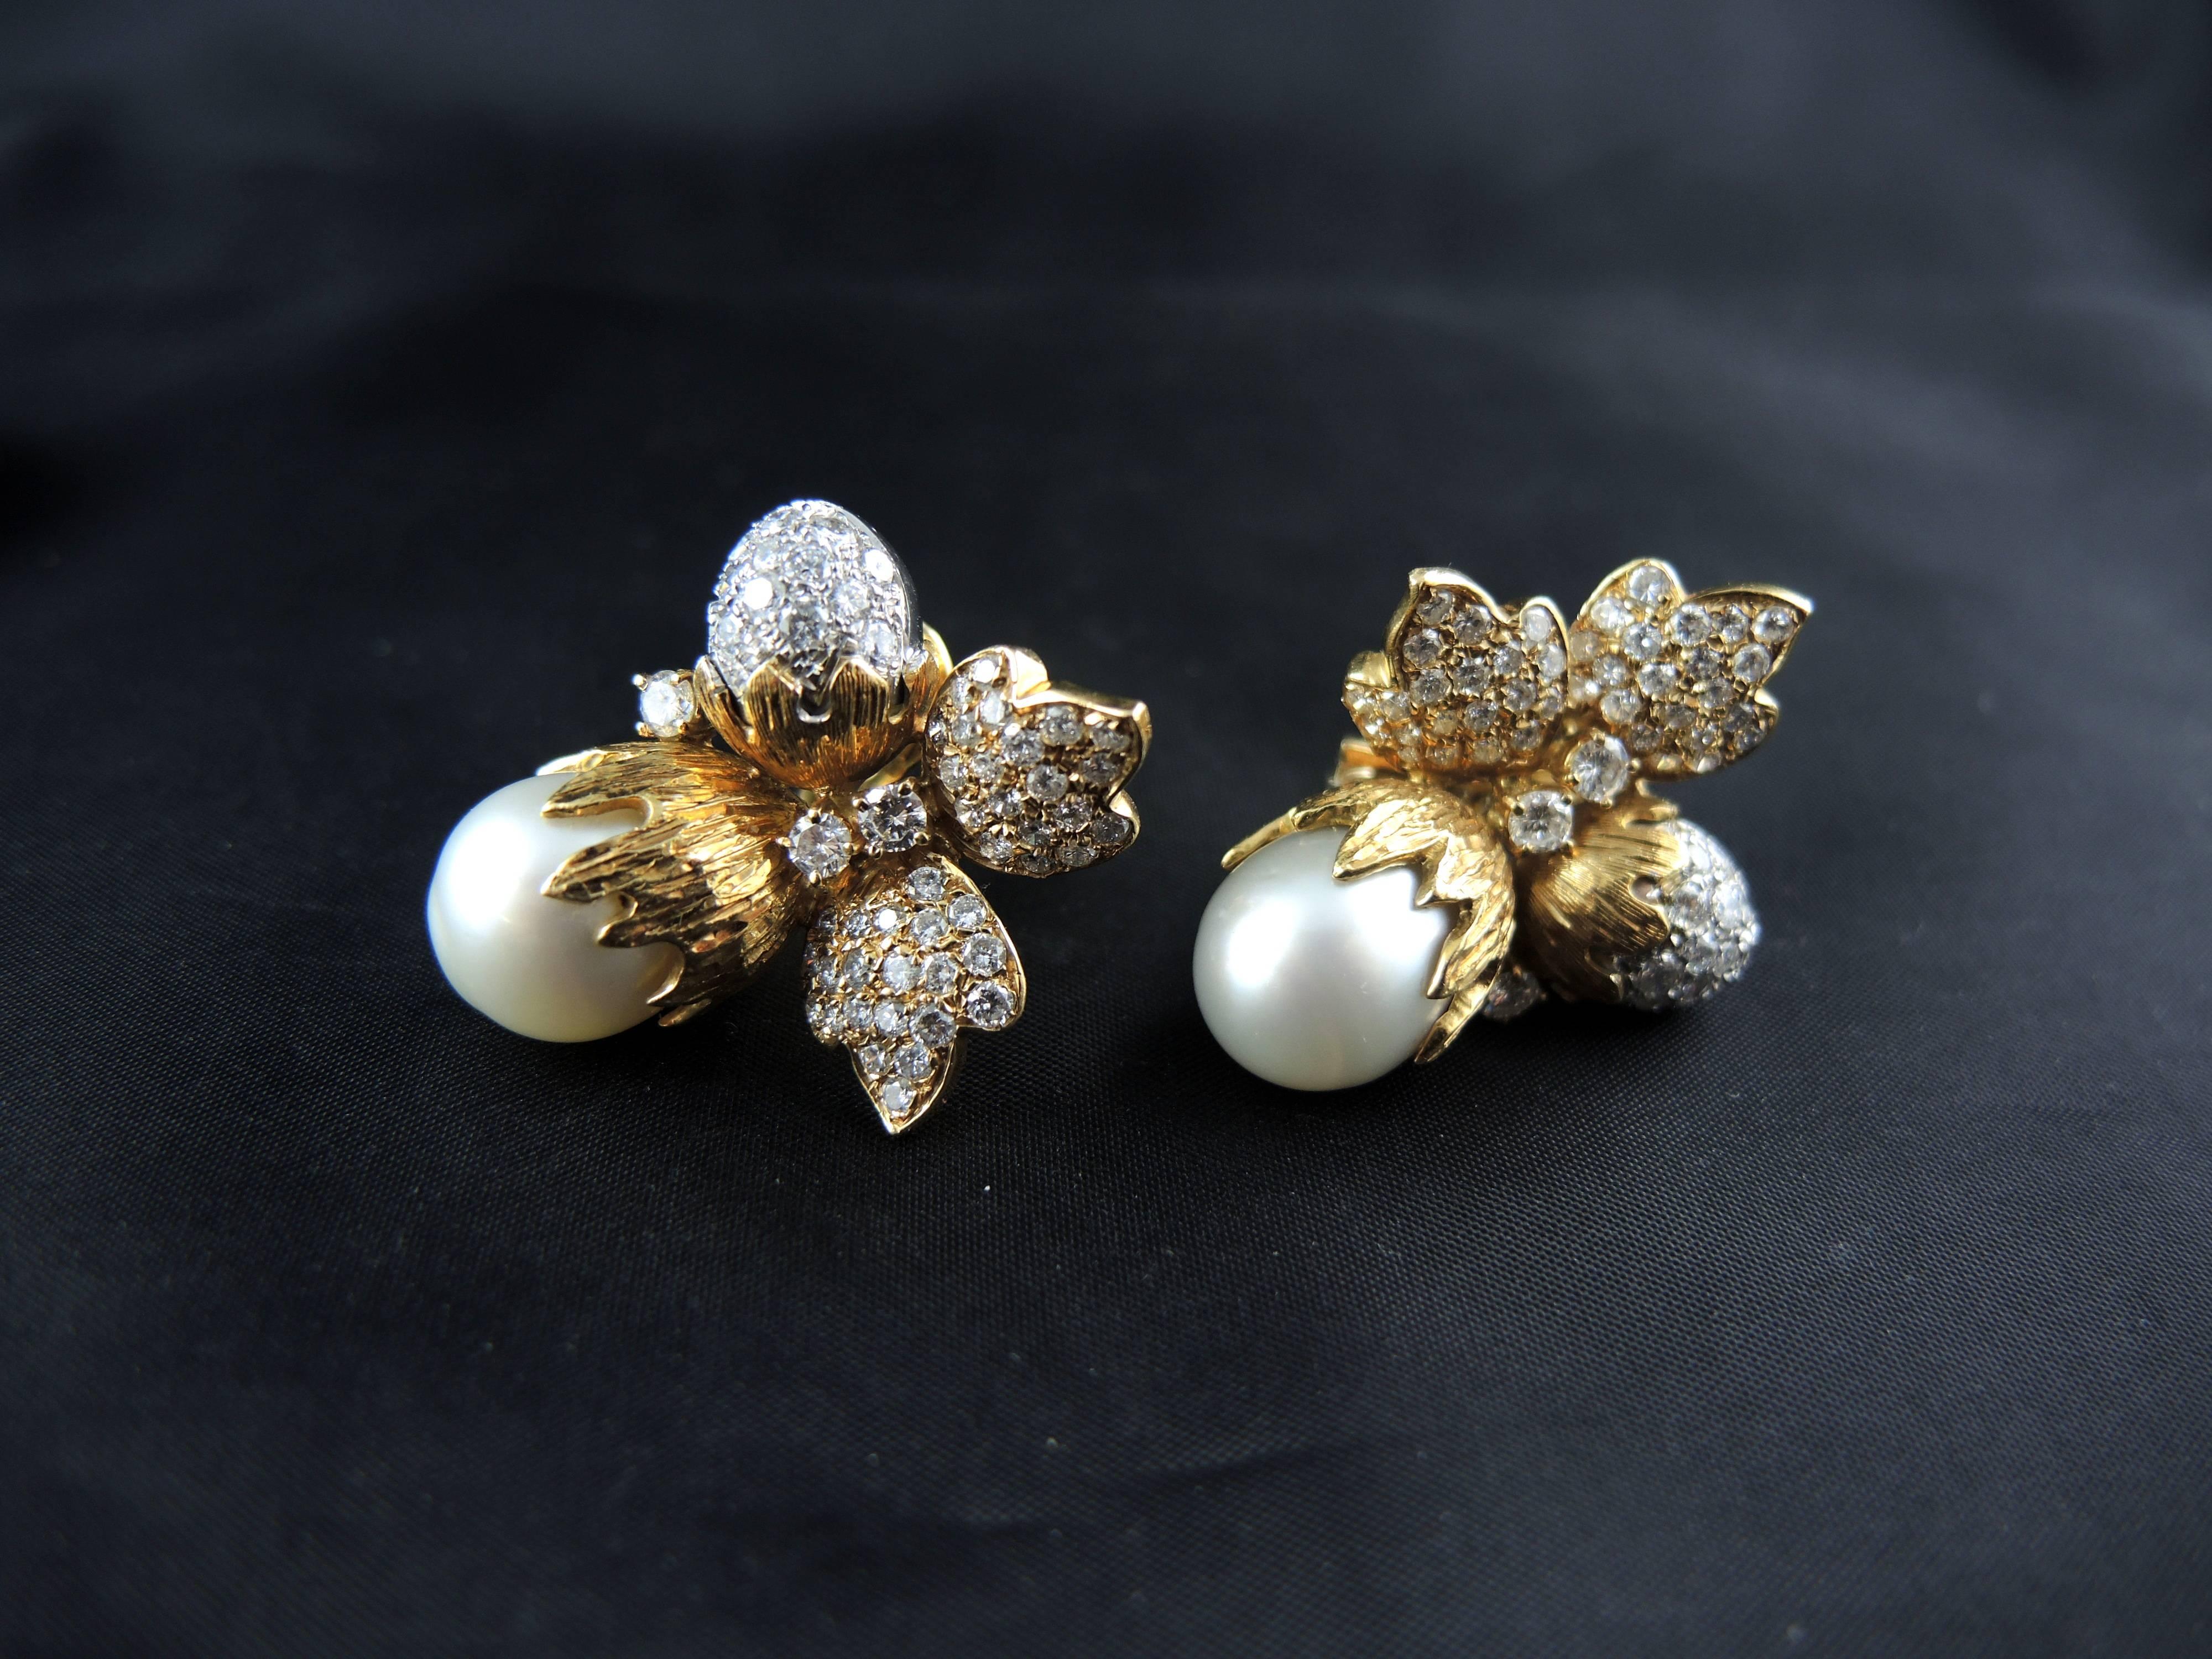 Women's Hazelnuts' Acorns and Leaves Earrings Set with Diamonds and South Sea Pearls